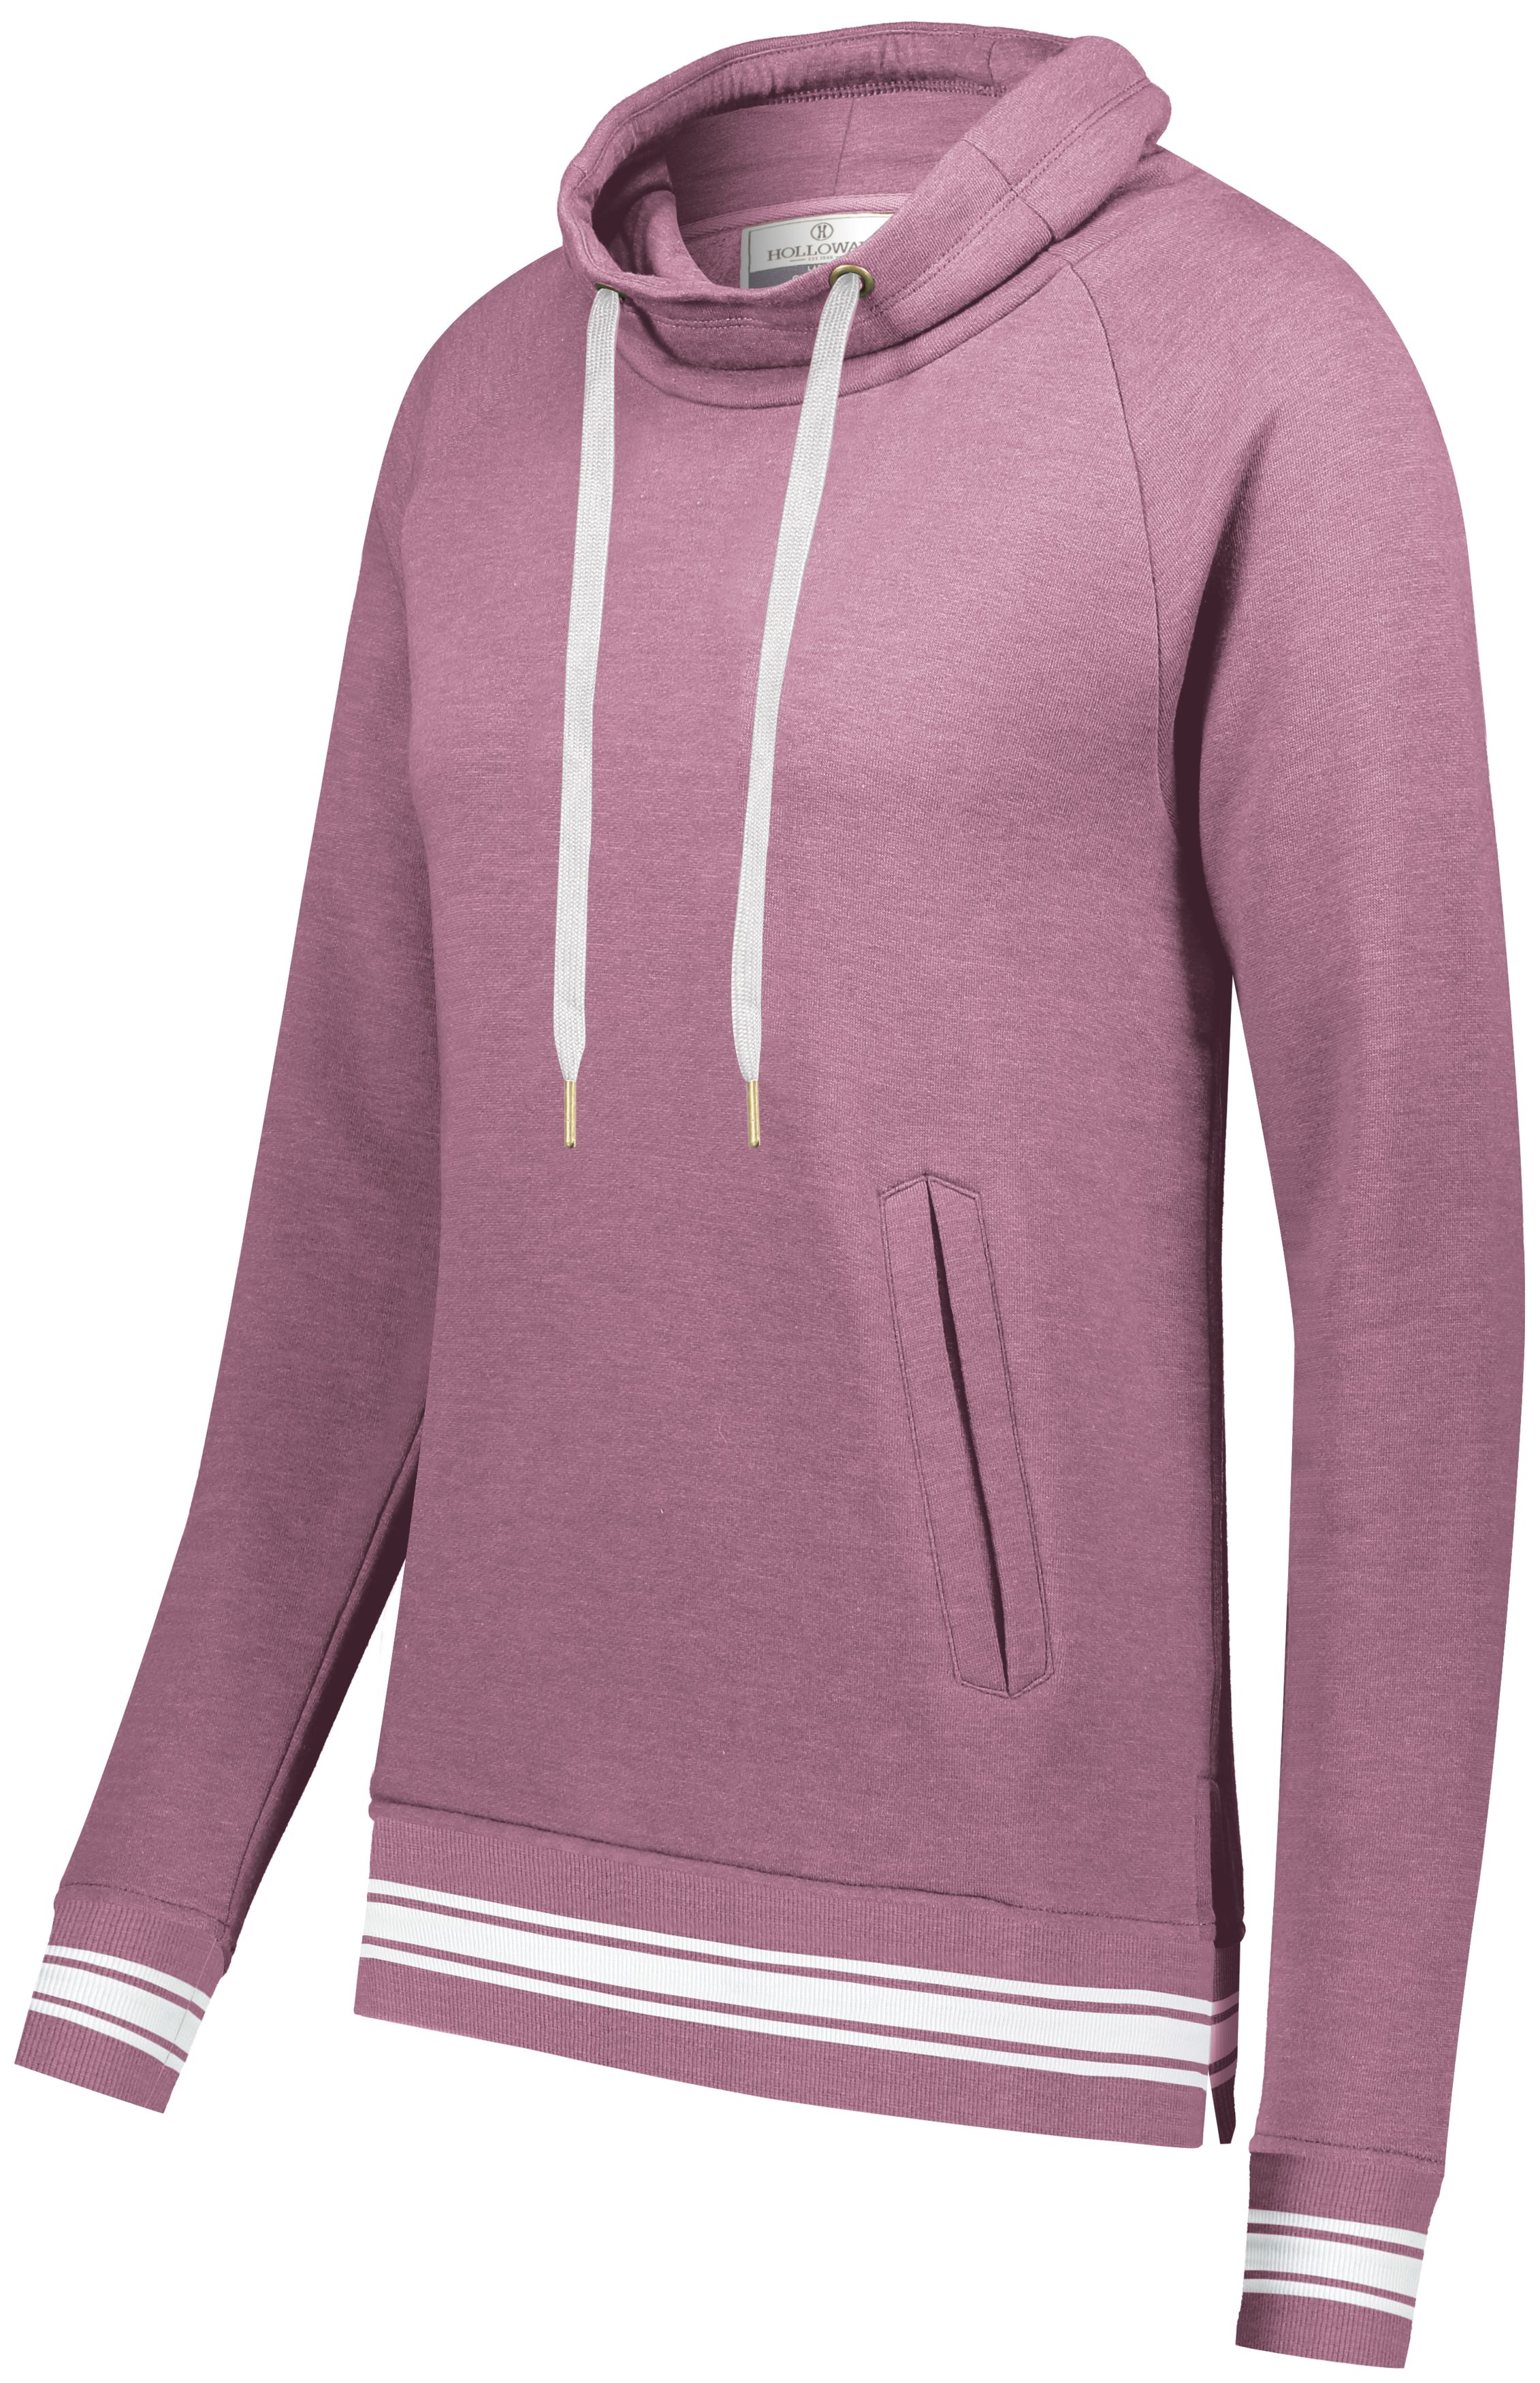 click to view Dusty Rose Heather/White